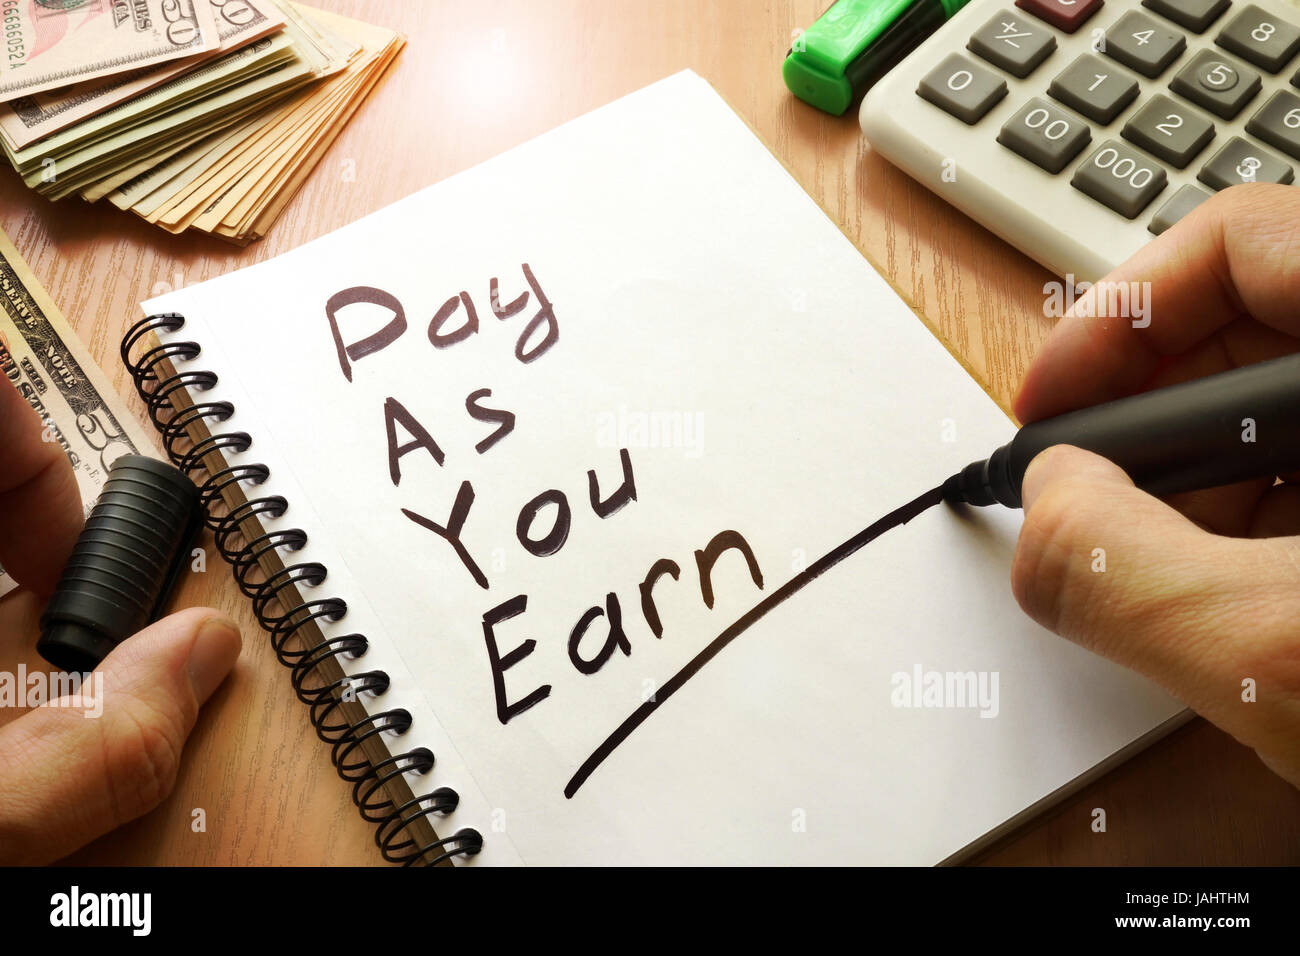 Pay As You Earn – PAYE written in a note. Stock Photo